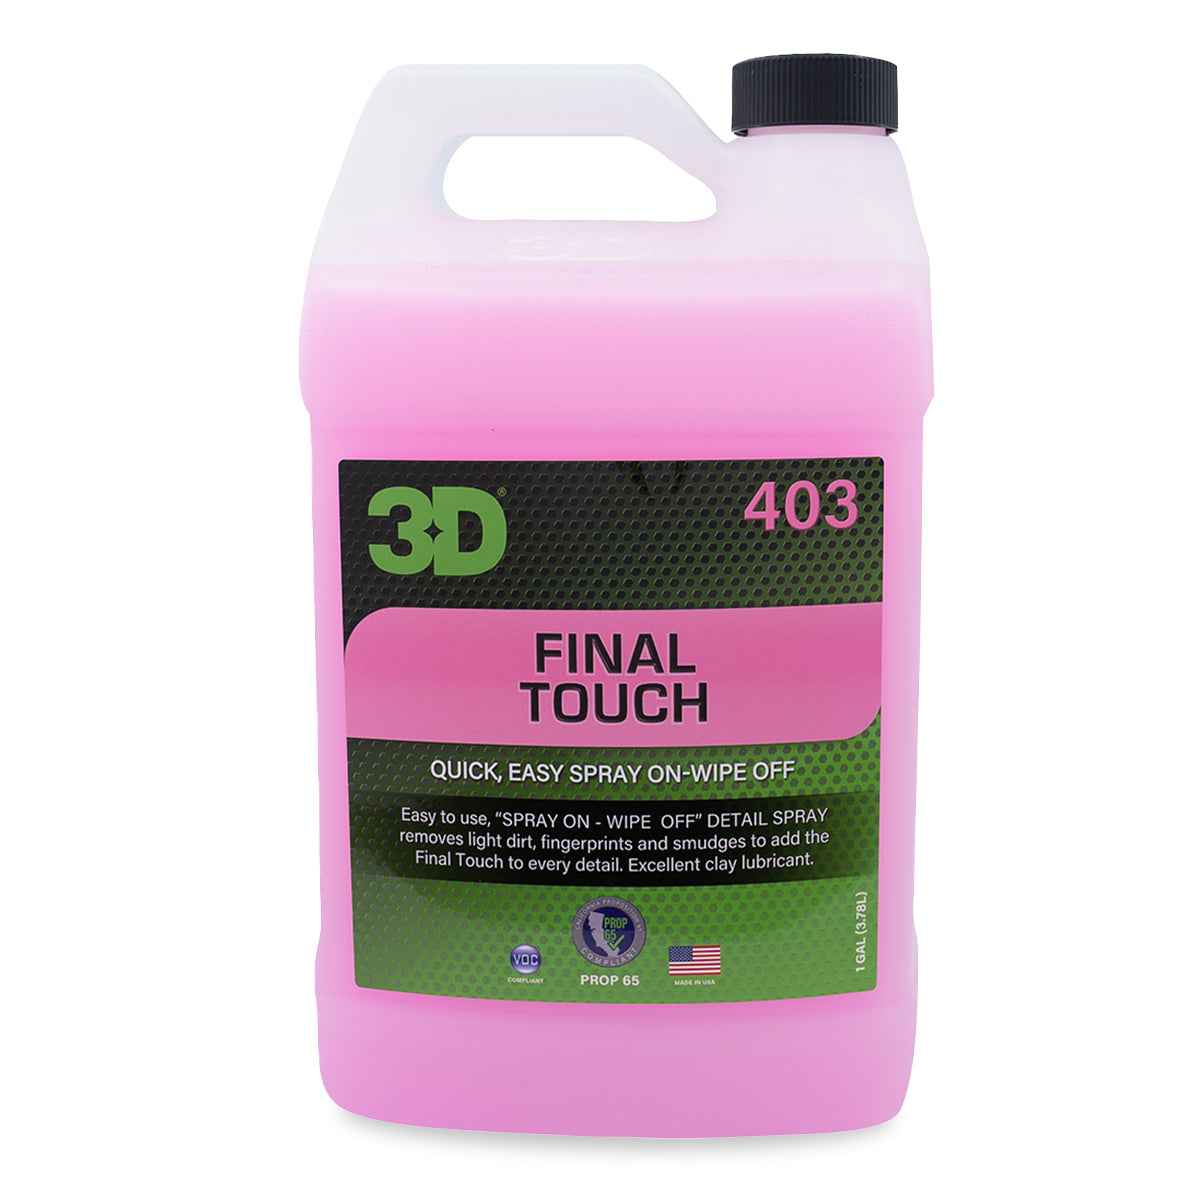 Final Detail Spray & Clay Lubricant